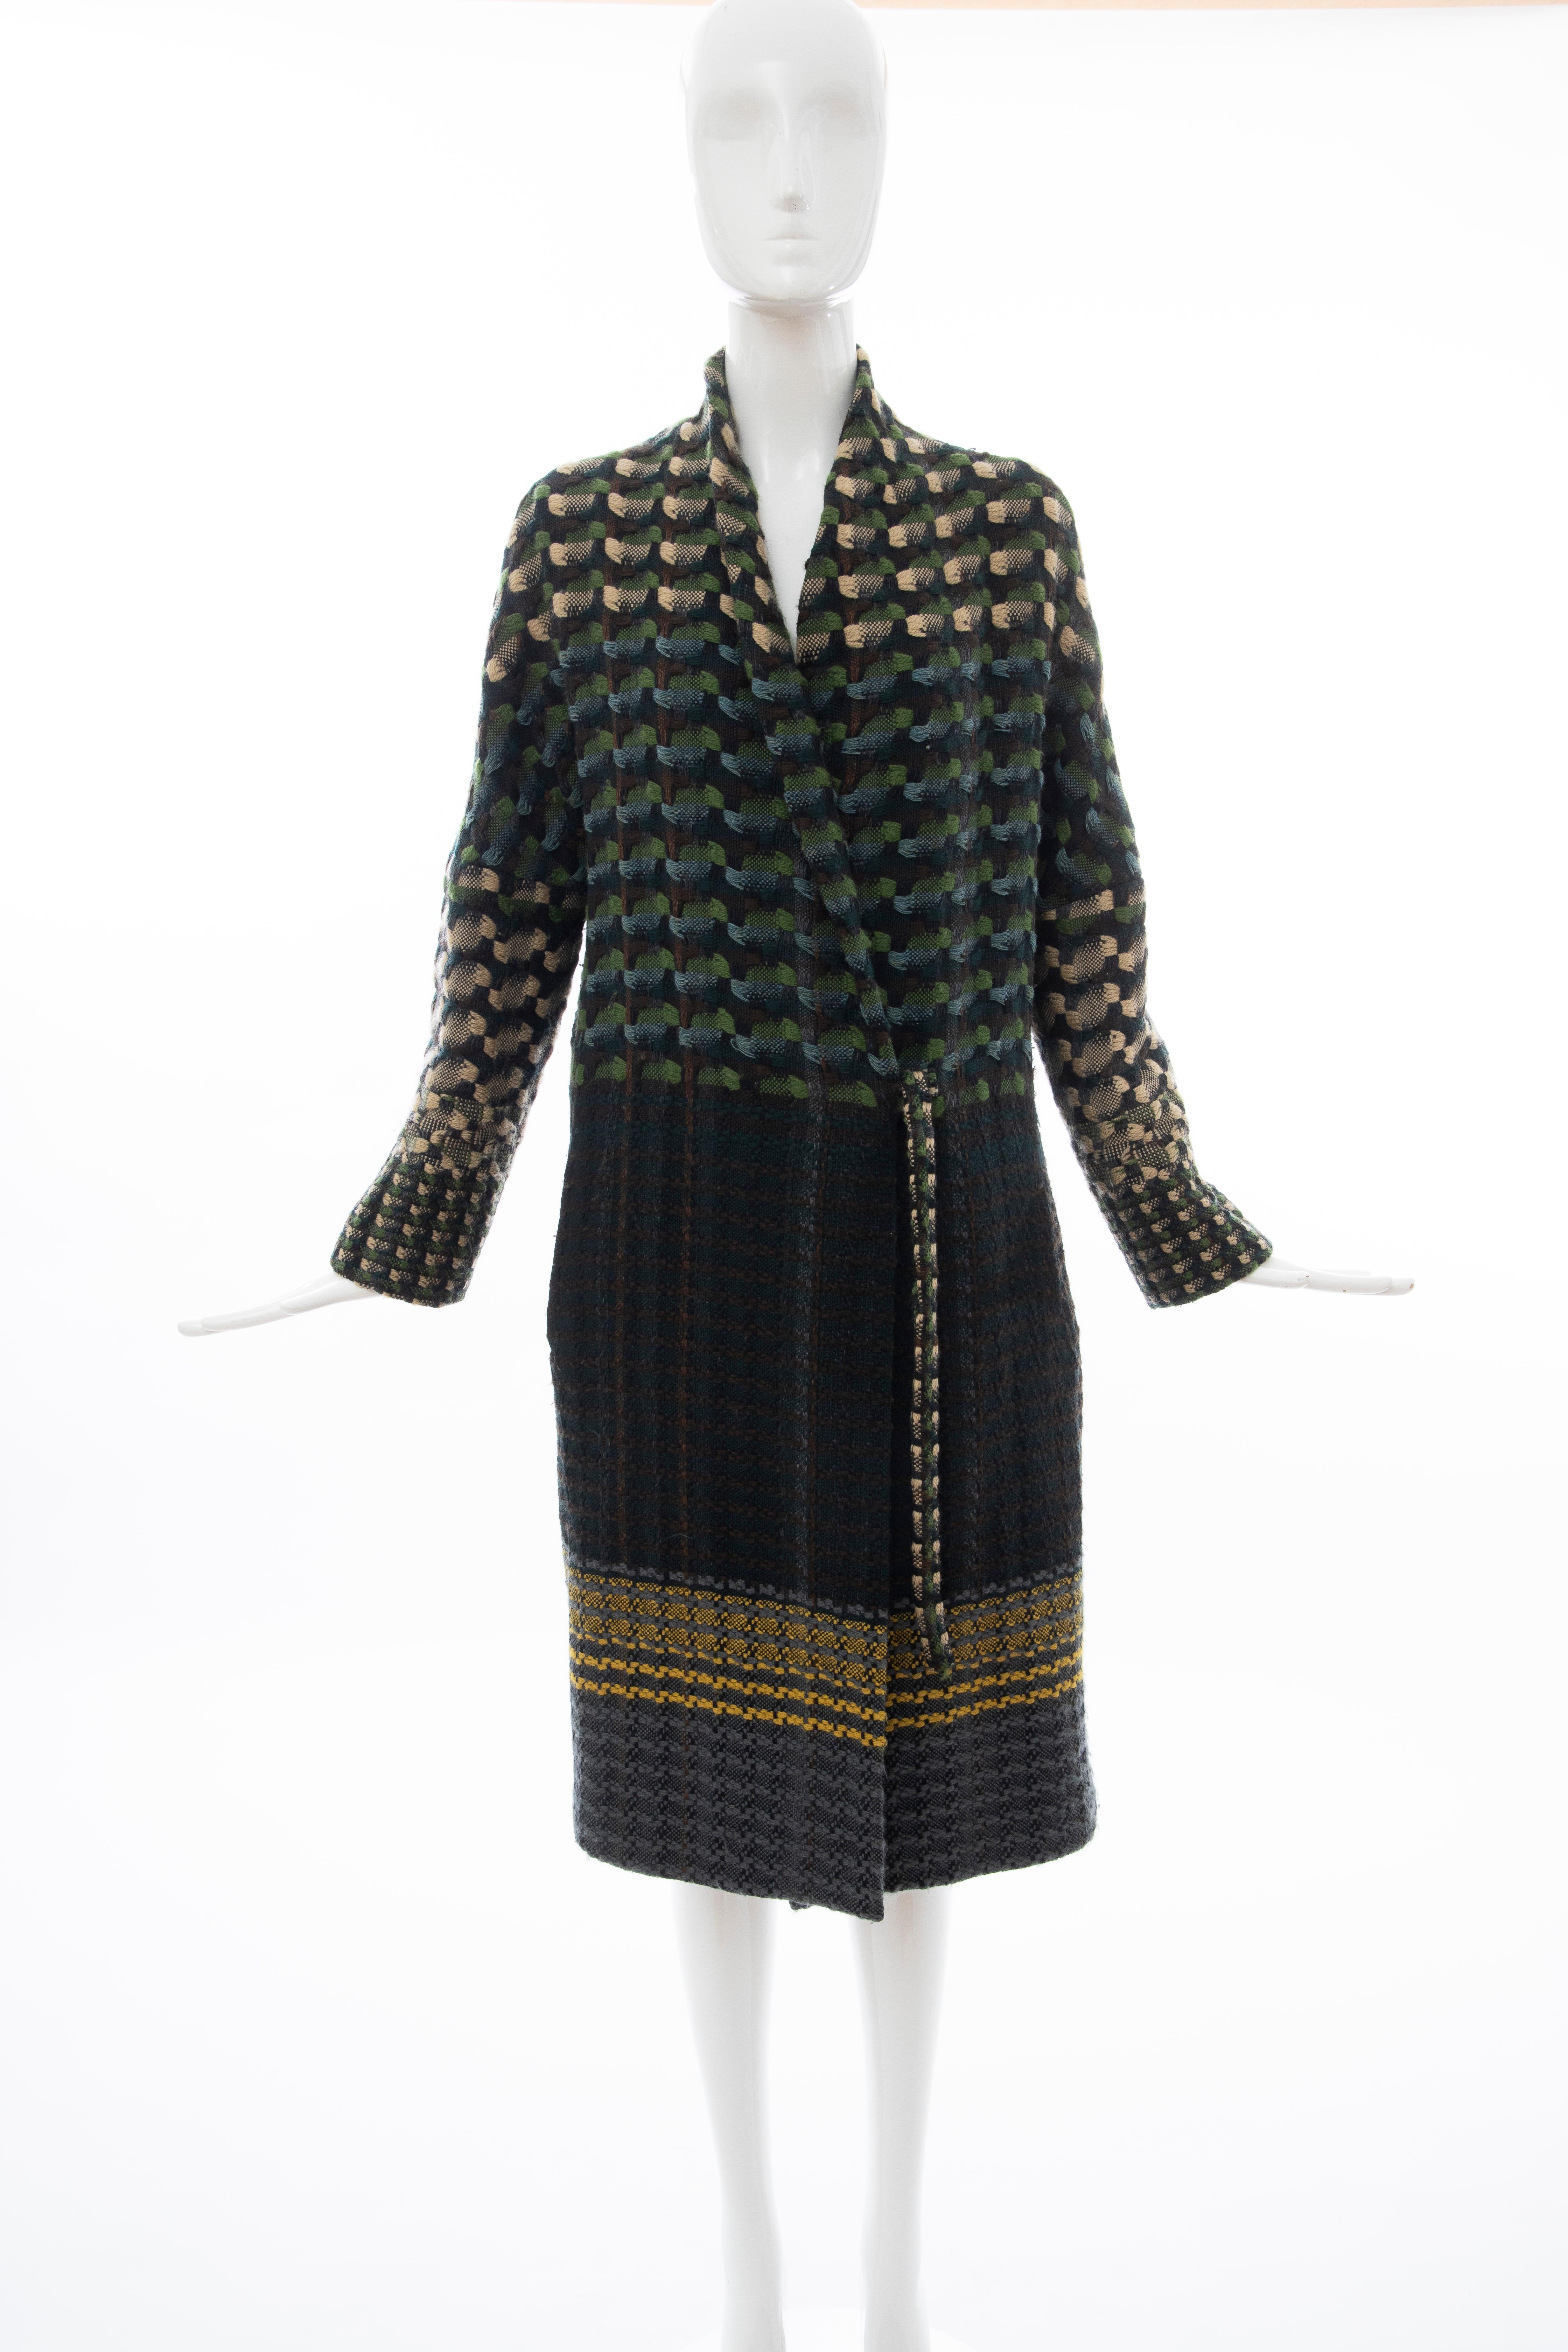 Dries van Noten, Runway Fall 2004, wool plain weave tweed coat with two front pockets, drawstring closure at front. and fully lined.

Large

Bust: 42,, Waist: 42, Shoulder: 16, Length: 42, Sleeve: 24

Fabric: 100% Wool fully lined